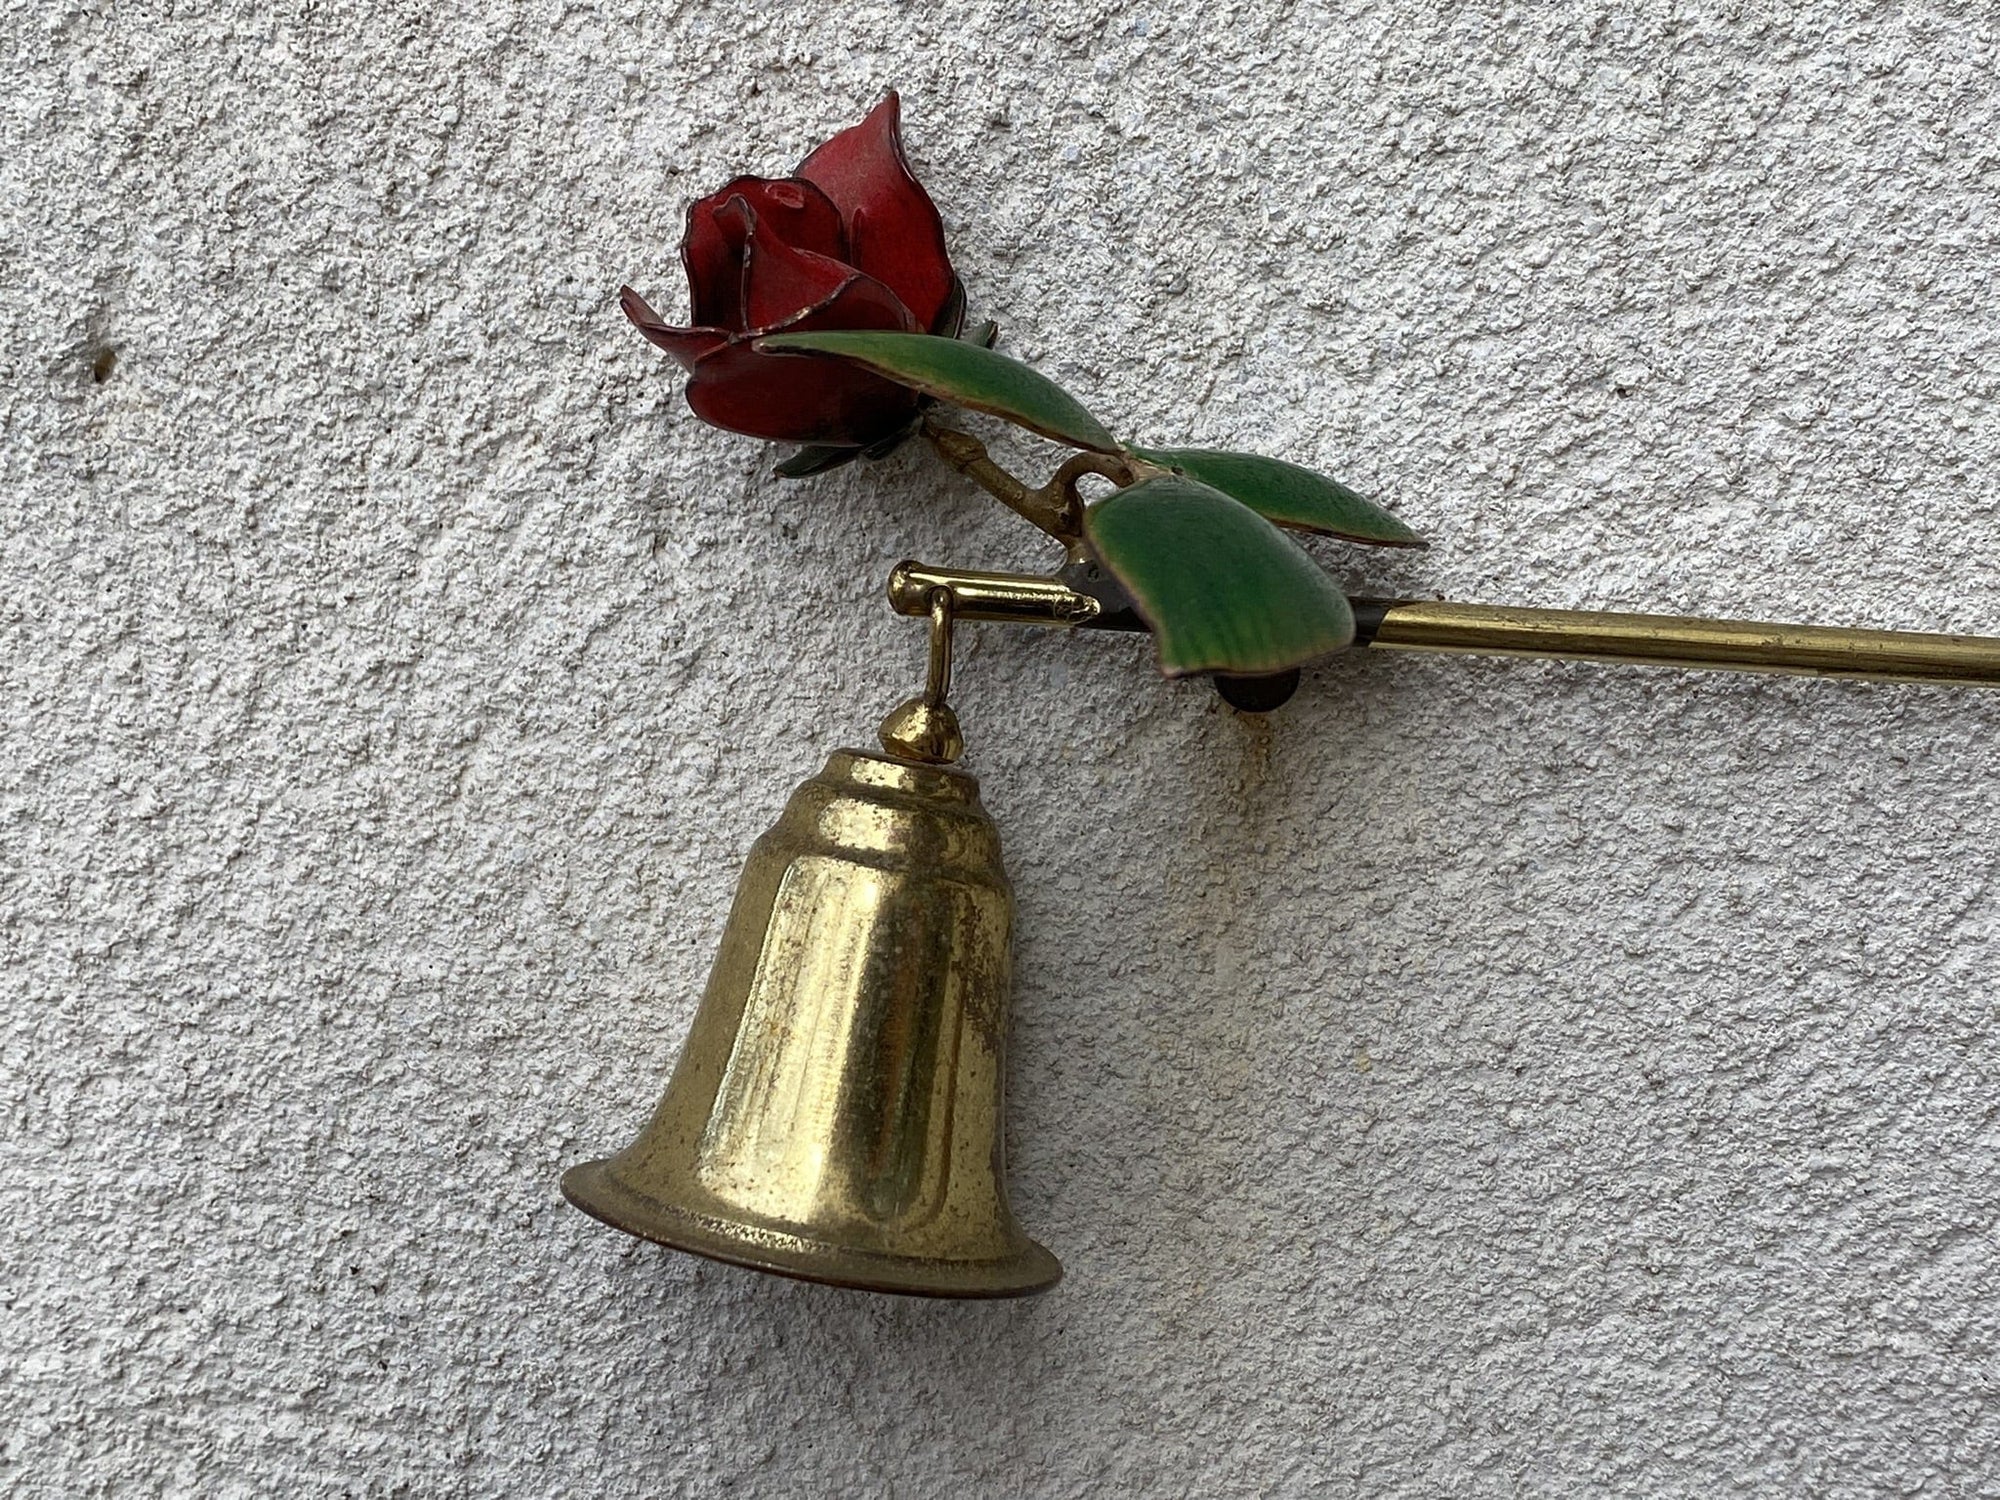 I Like Mike's Mid Century Modern Candle Snuffers Brass Candle Snuffer with Red Rose Cap and 7" Reach